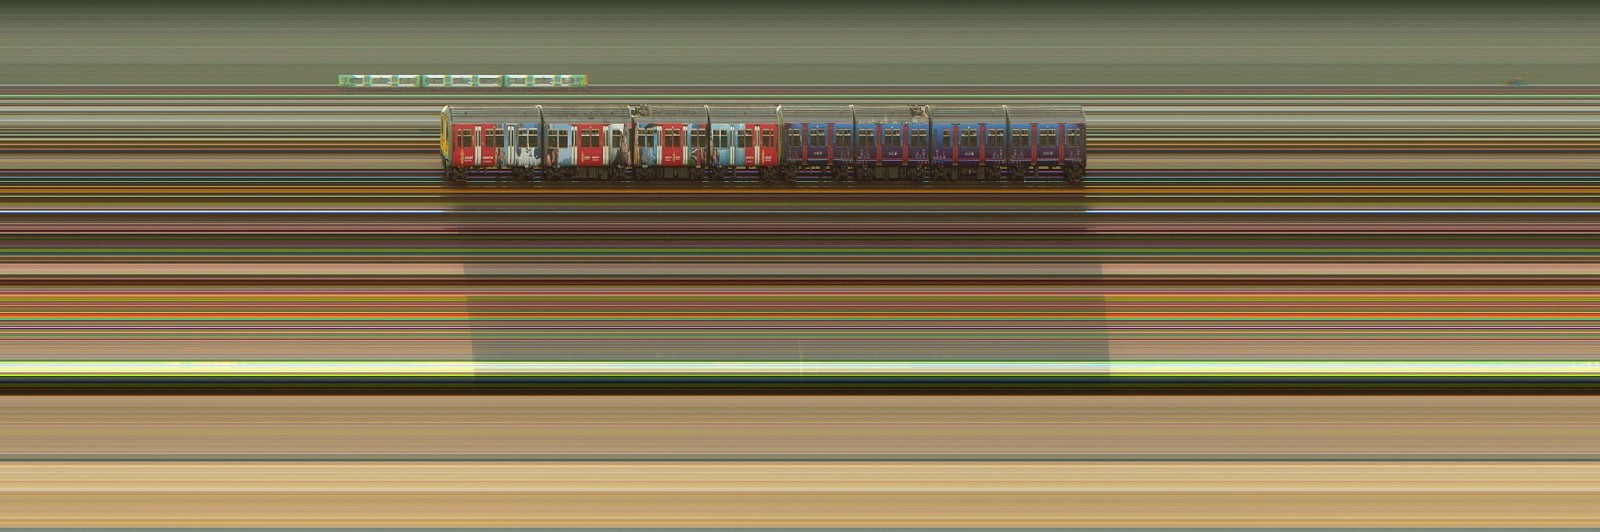 Jay Mark Johnson, BRIGHTON TRAINS #89, 2012 United Kingdom
archival pigment on paper, mounted on aluminum, 40 x 120 in. (101.6 x 304.8 cm)